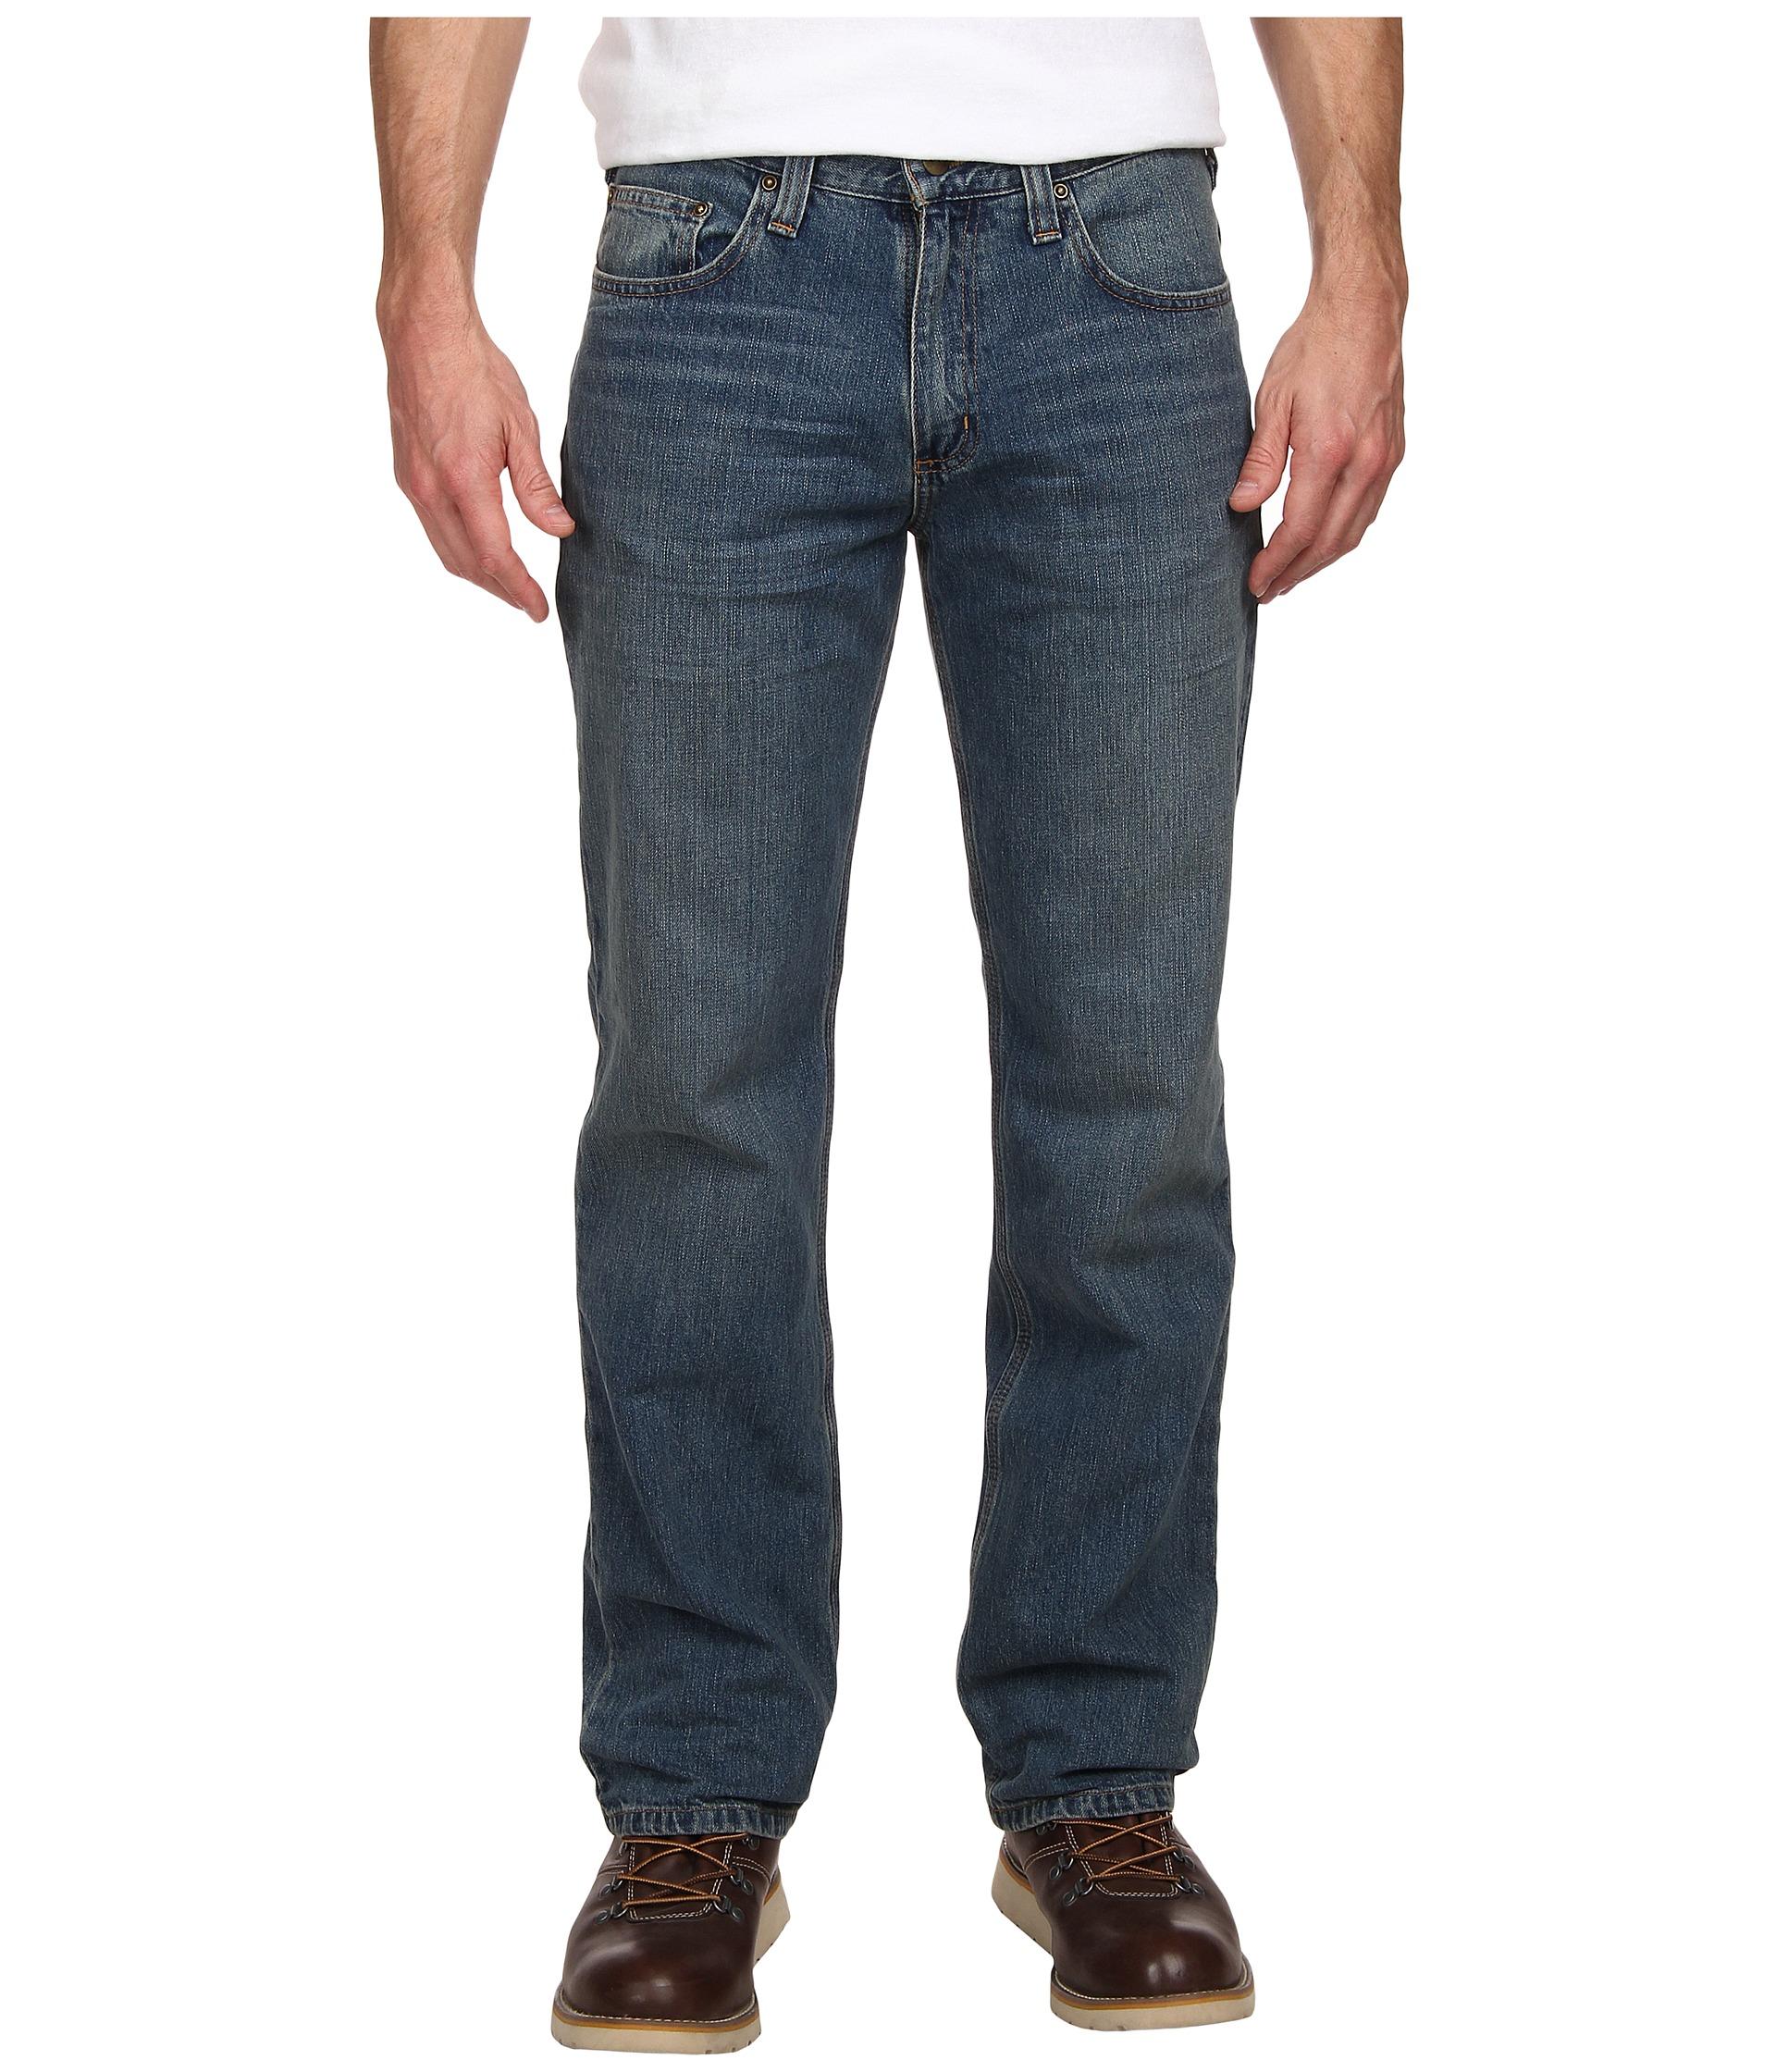 Carhartt Cotton Relaxed Straight Jean - B320 in Blue for Men - Lyst